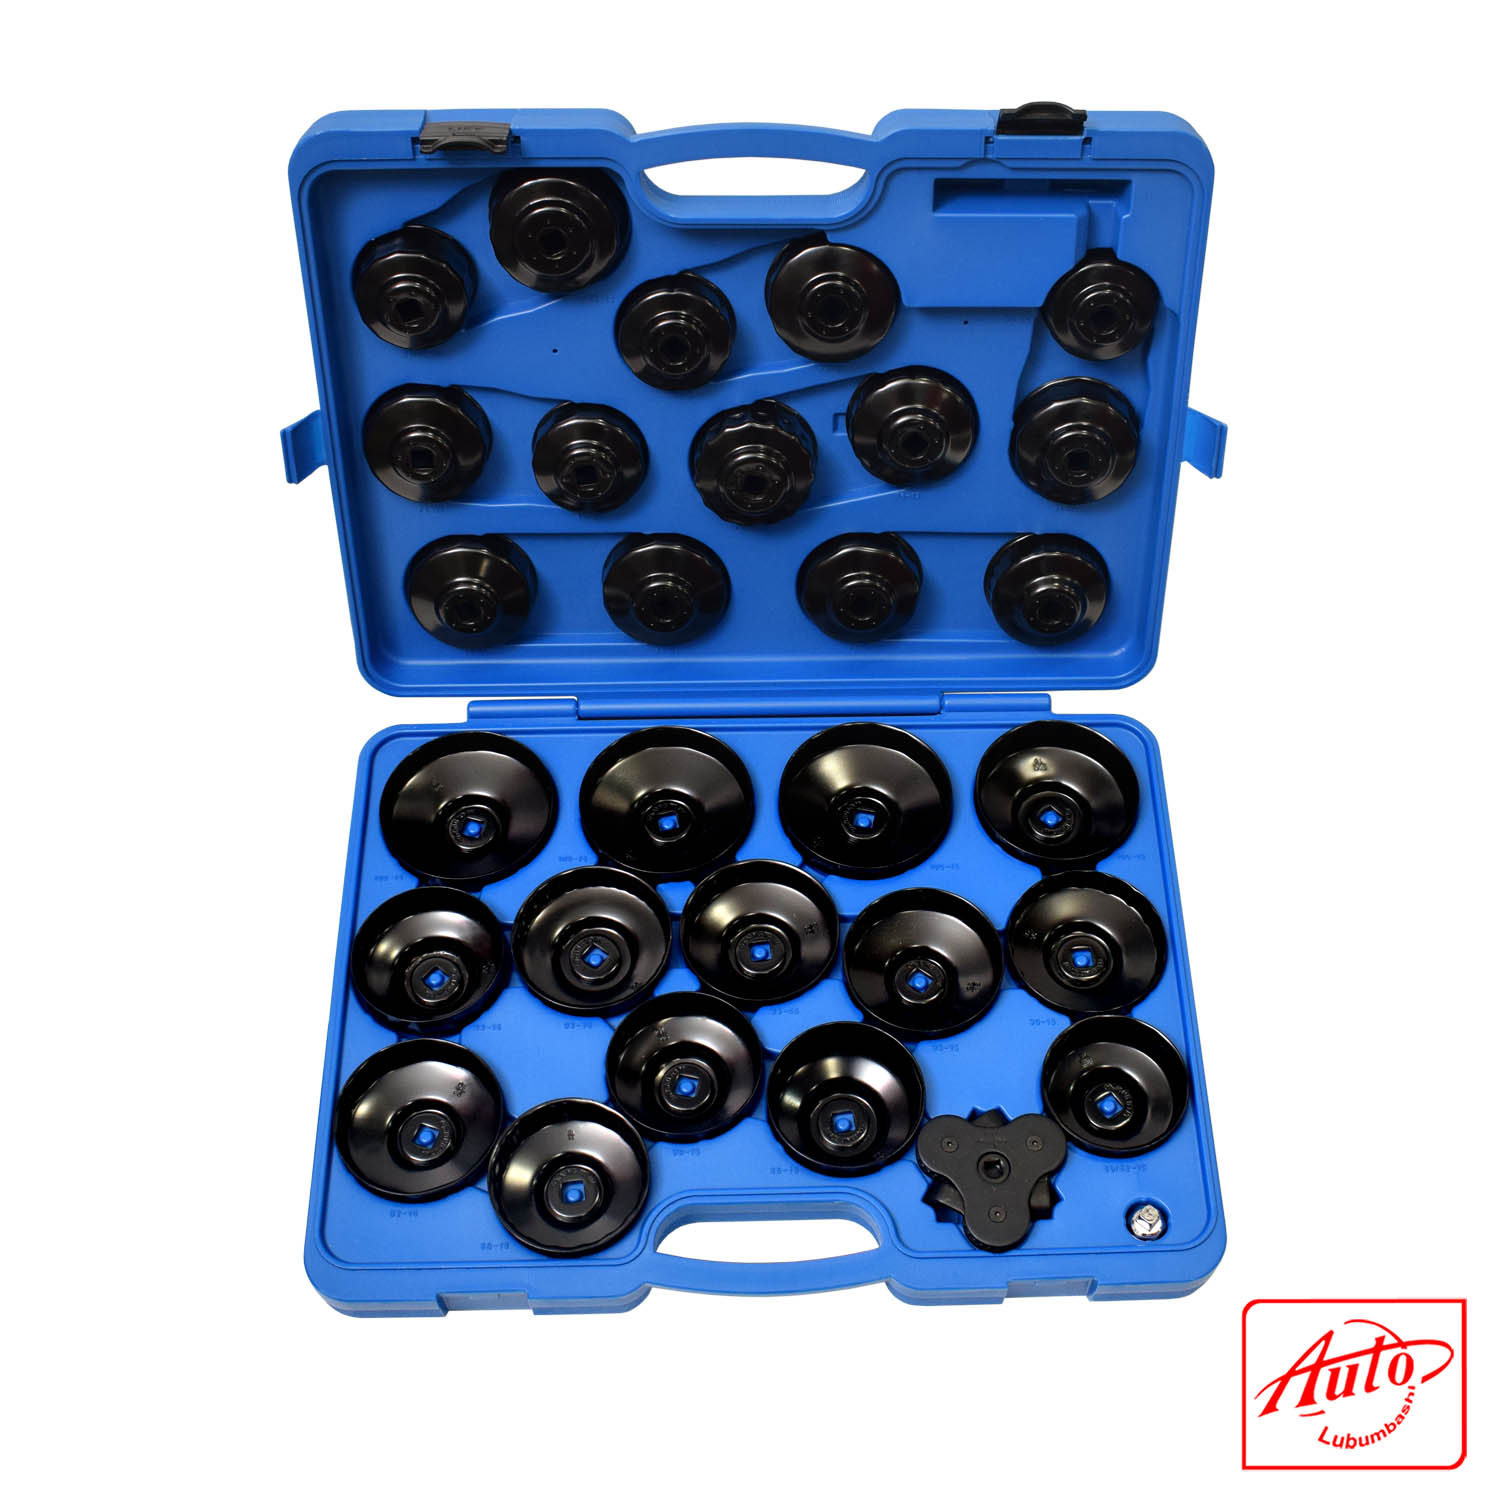 30PC.CUP TYPE OIL FILTER WRENCH SET – KING TONY – Auto Lubumbashi